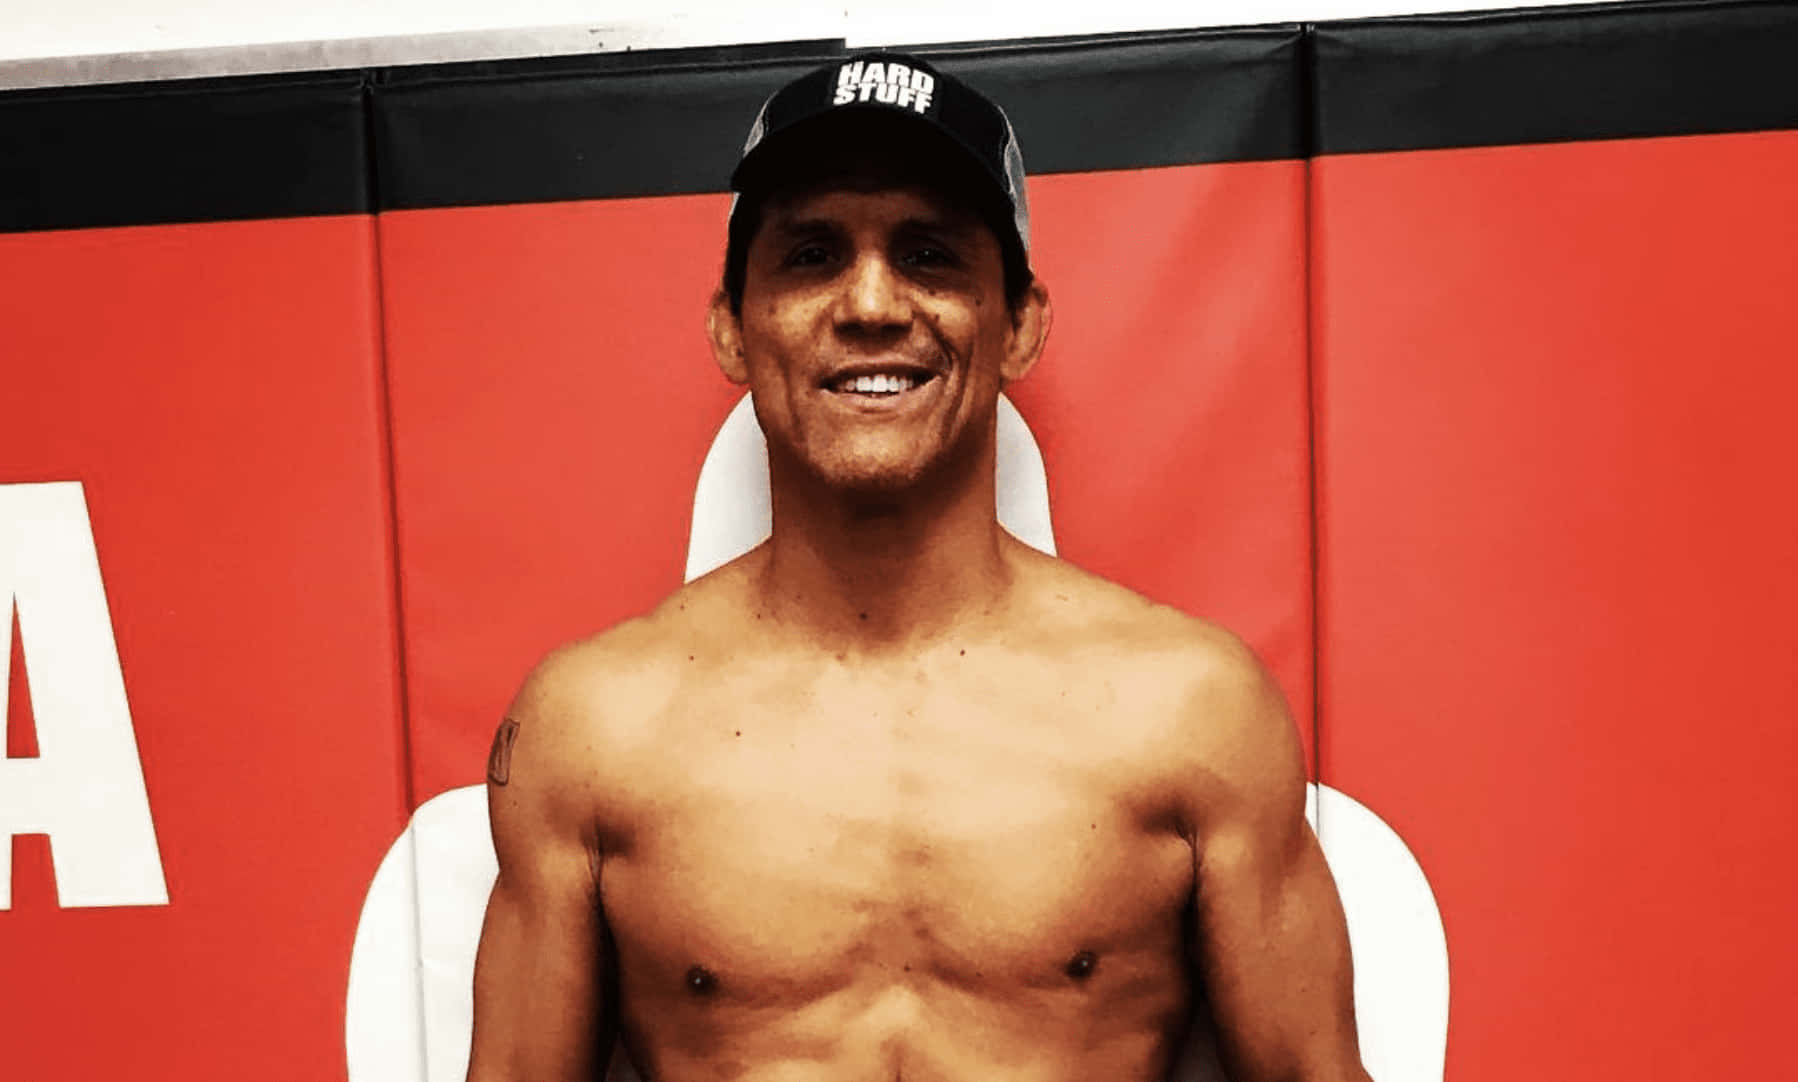 Frank Shamrock Lean And Muscular Body Picture